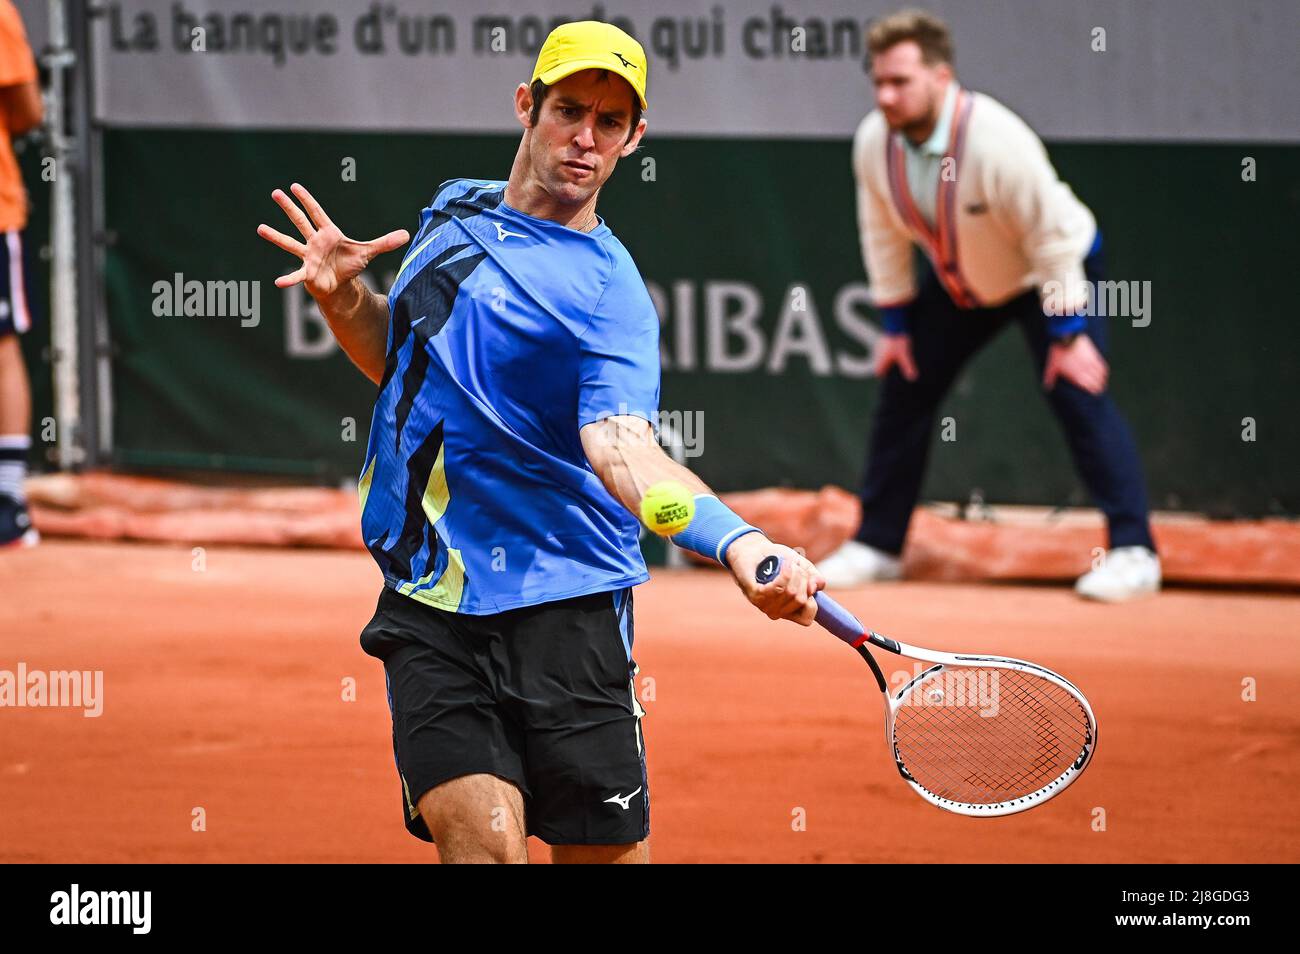 May 16, 2022, Paris, France, France: Bradley KLAHN of United States during  the Qualifying Day one of Roland-Garros 2022, French Open 2022, Grand Slam  tennis tournament at the Roland-Garros stadium on May